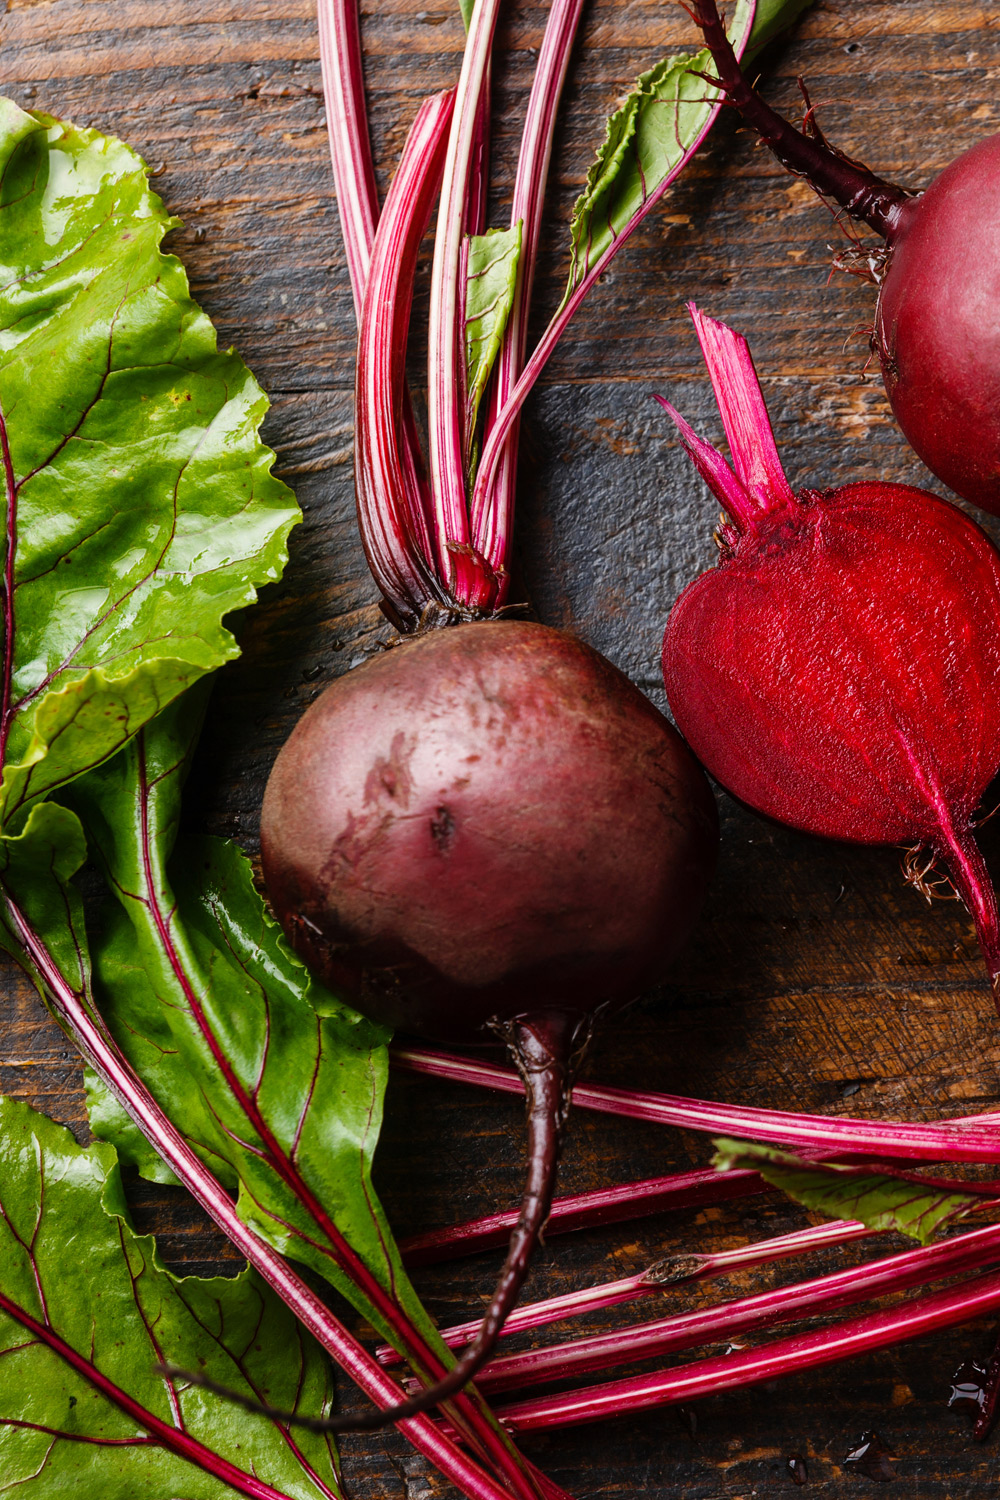 Beetroot is one of the best sources of nitrates.